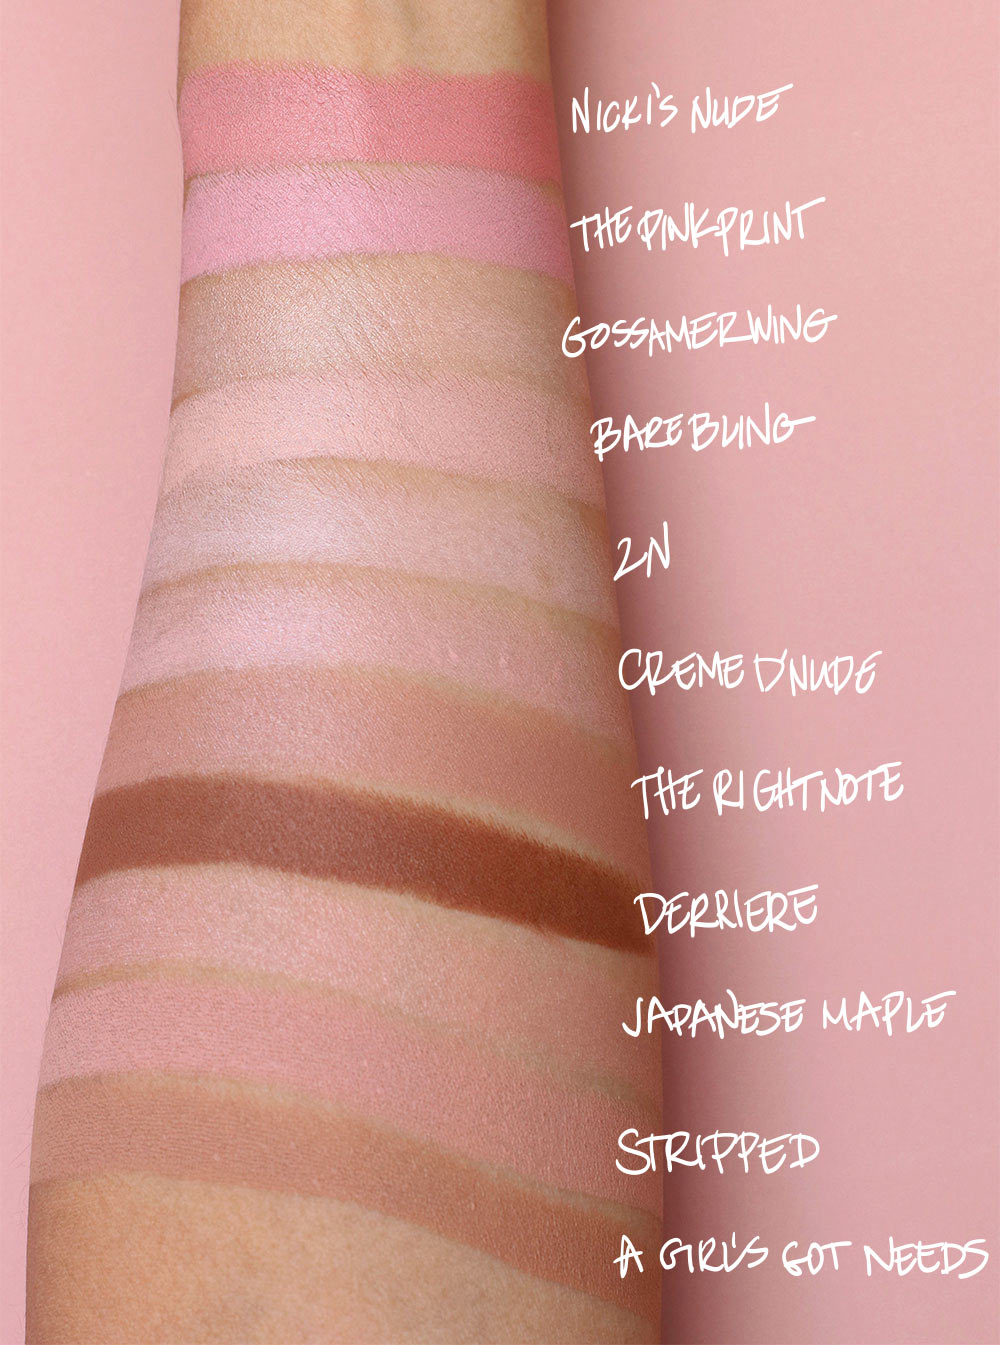 From the top: Nicki’s Nude, The Pinkprint, Gossamer Wing, Bare Bling, 2N, C...